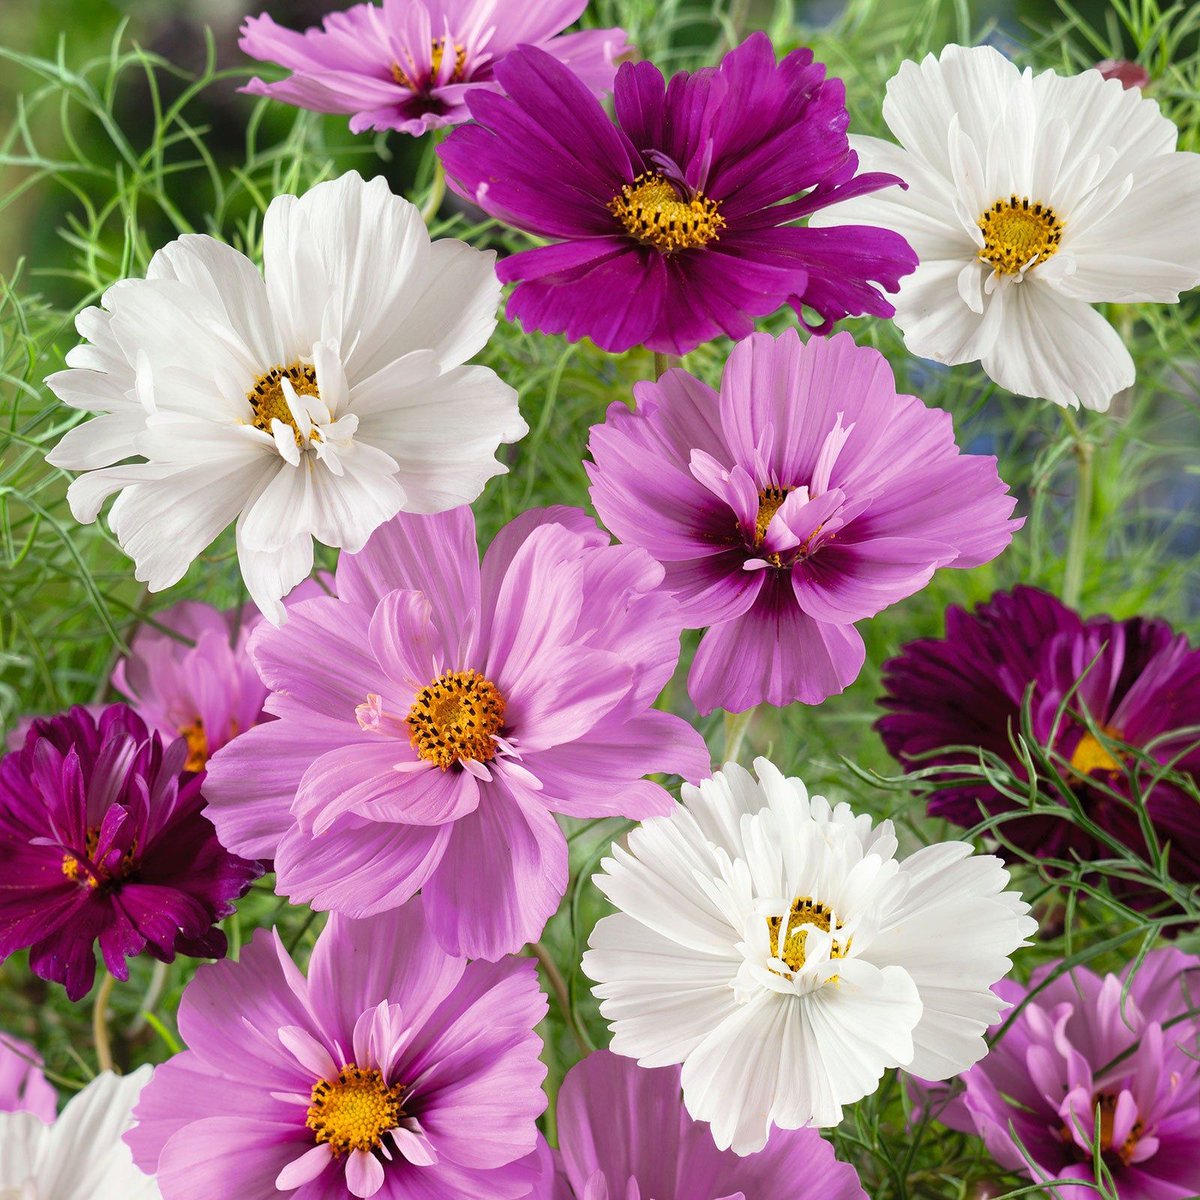 Cosmos Psyche Mix flowers for you this morn ❤️ Have an enchanting Sunday 😄